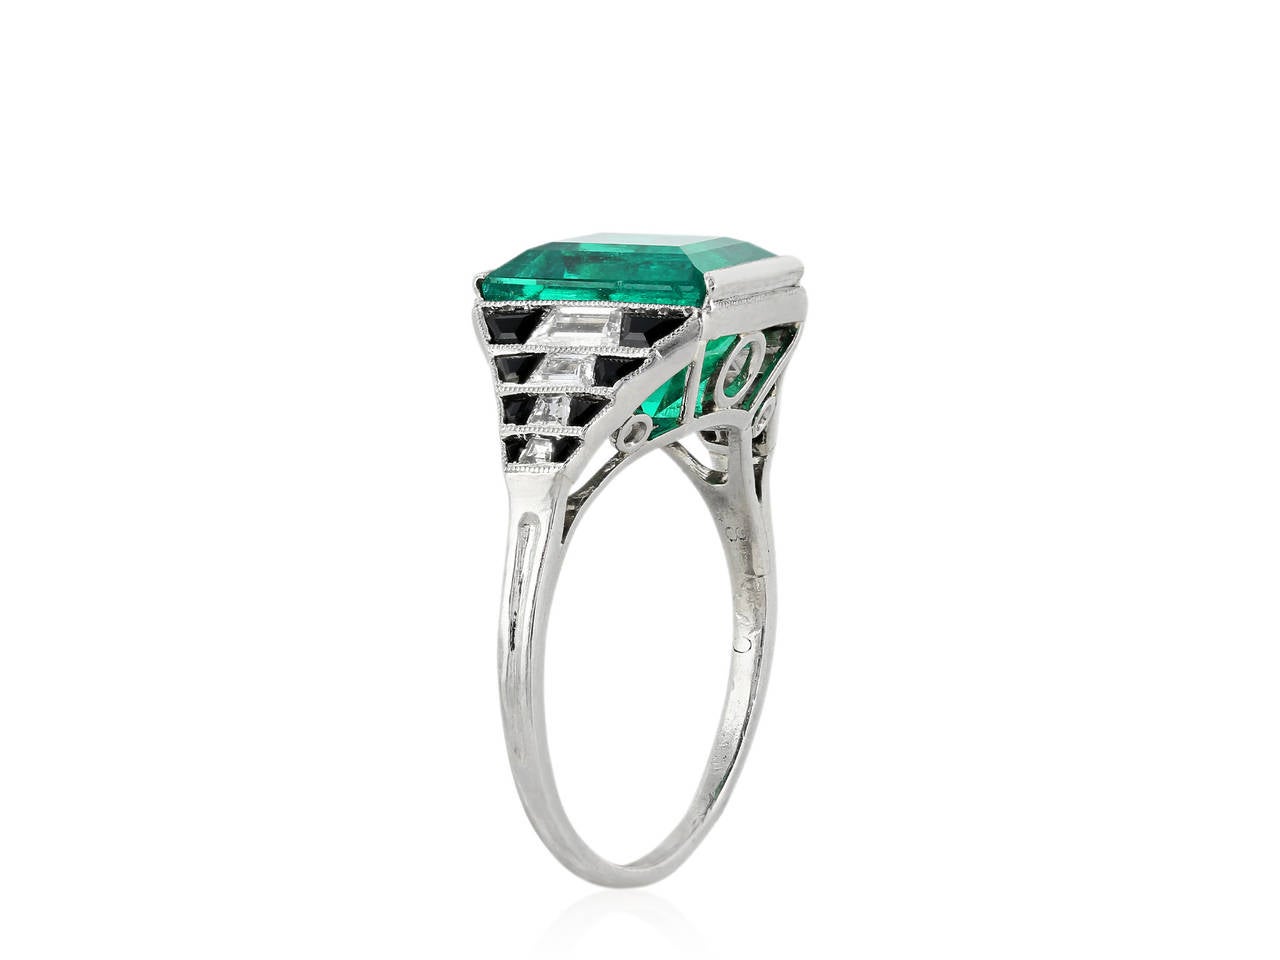 Platinum Art Deco ring consisting of 1 Colombian emerald weighing 4.36 carats, the emerald is flanked by step cut trapezoid diamond and custom cut onyx and a filigree undergallery.